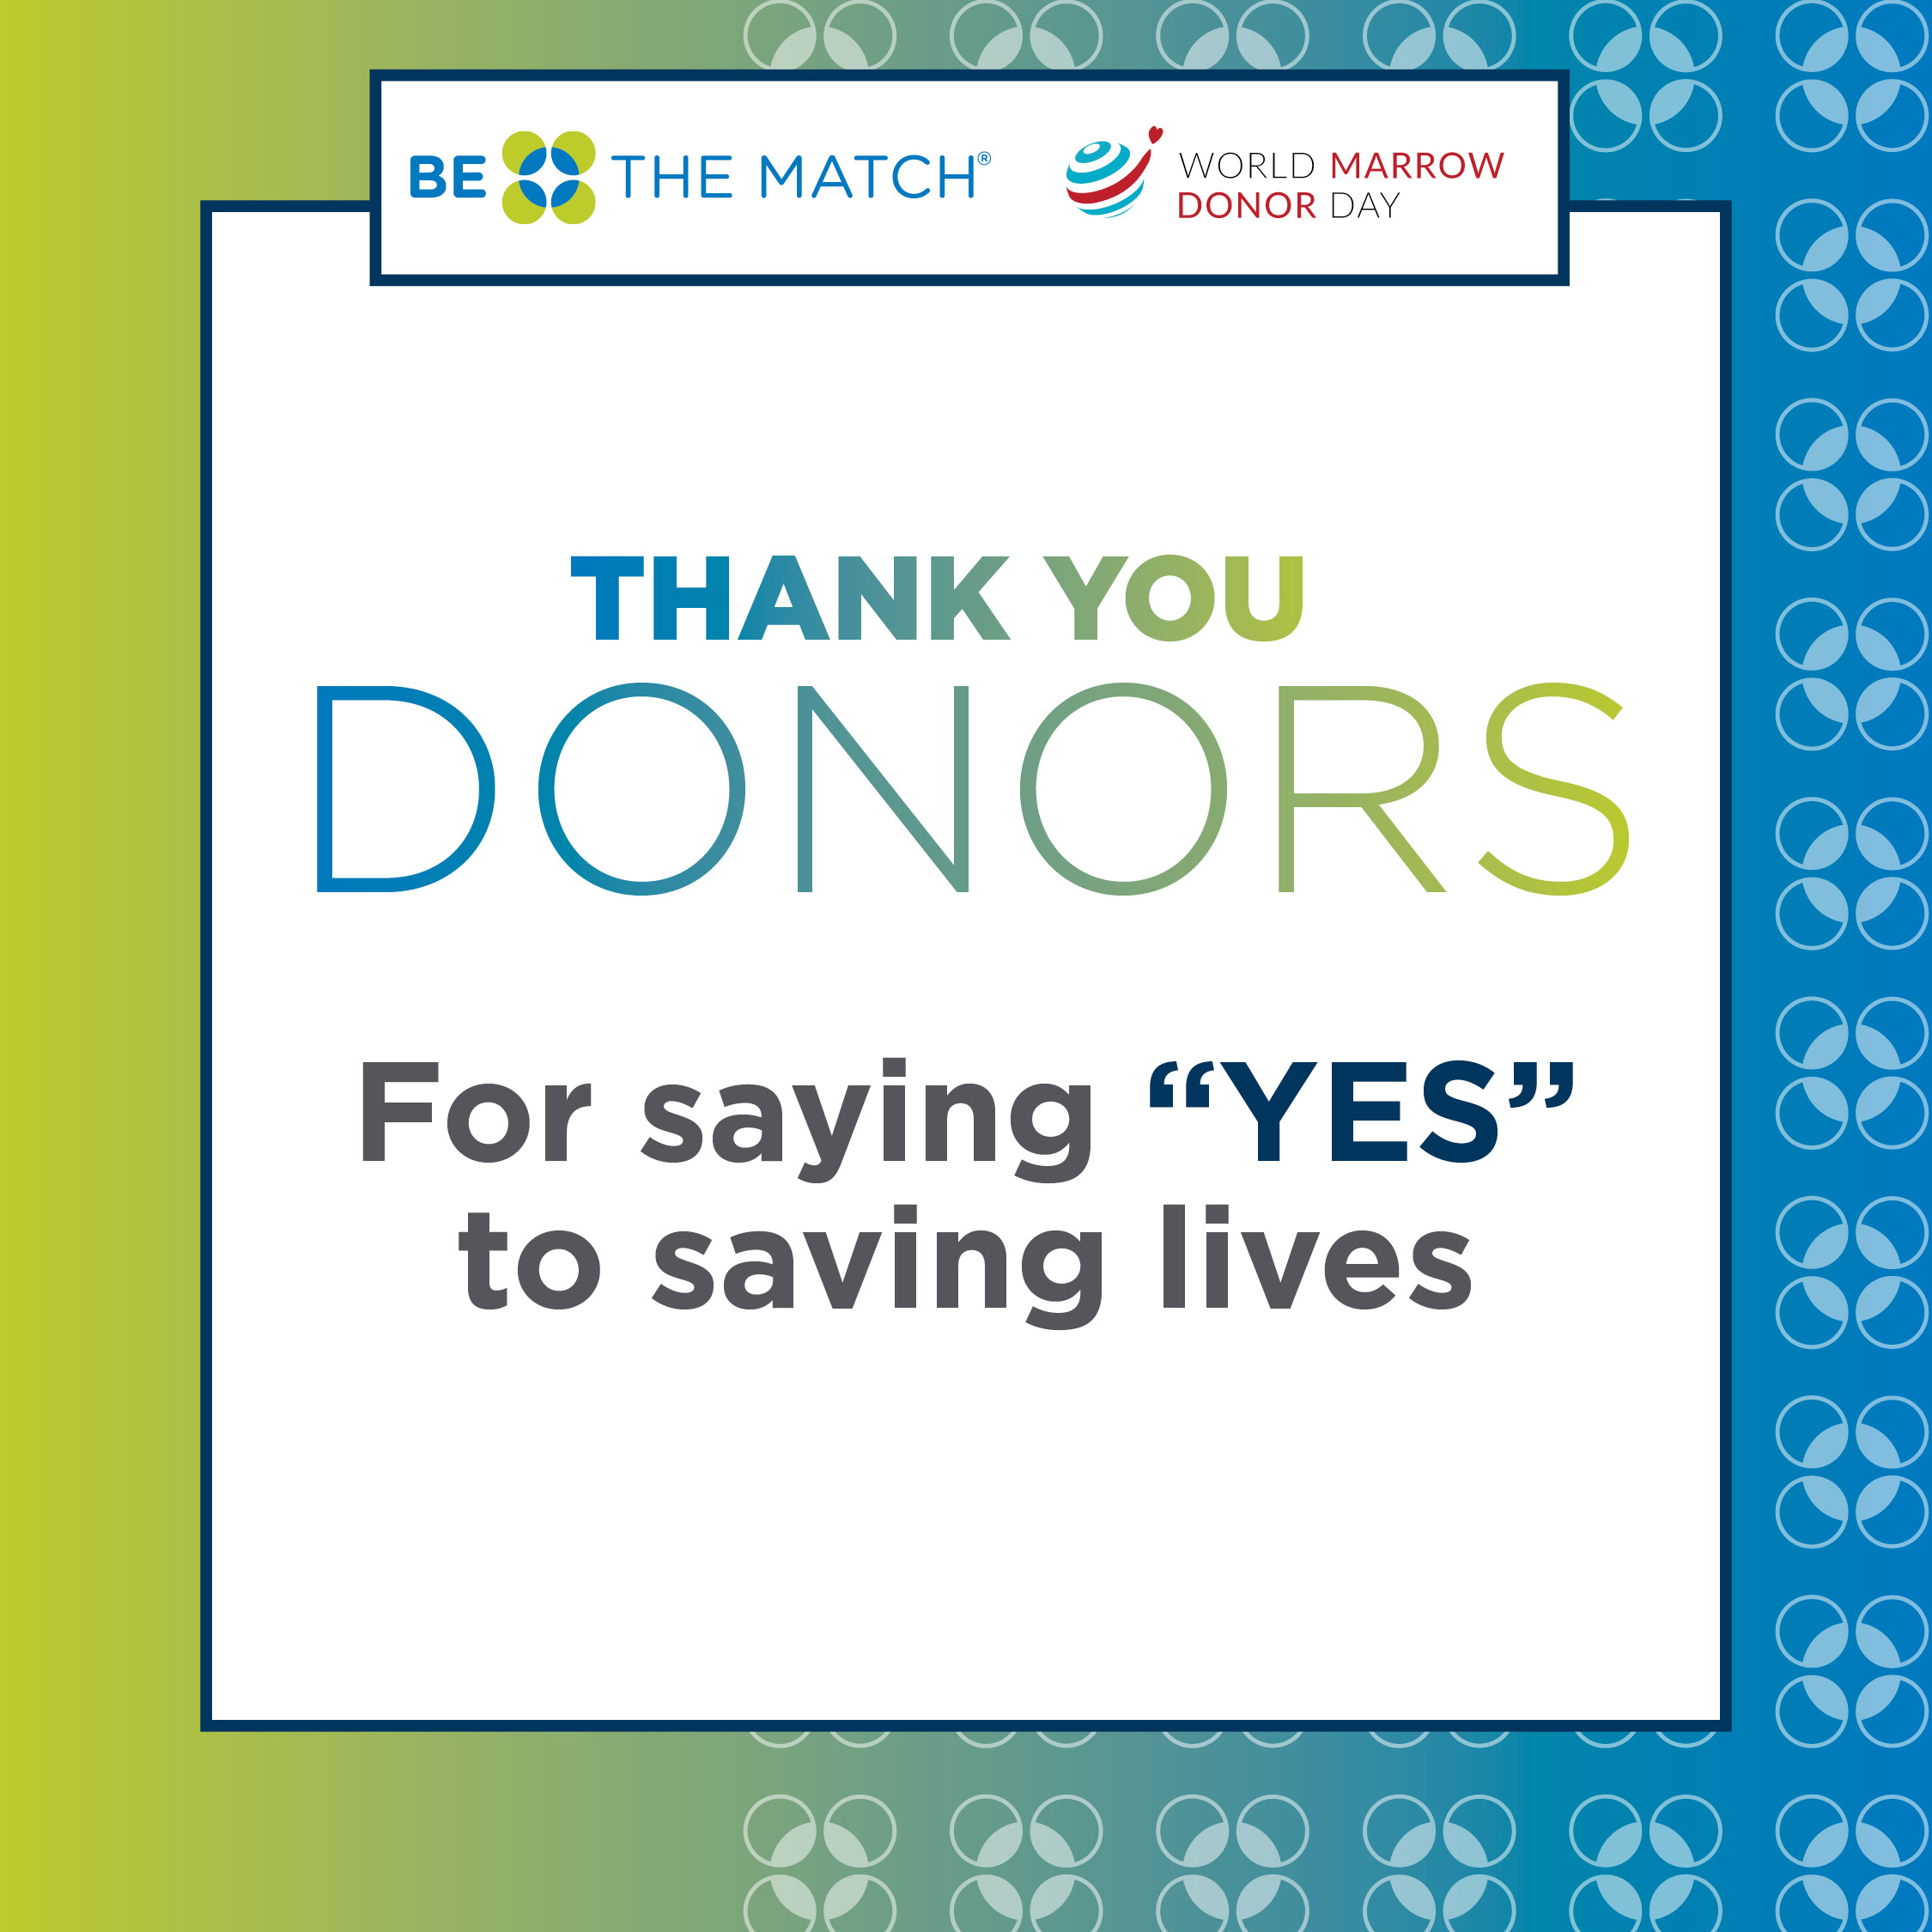 Thank you donors for saying yes to saving lives